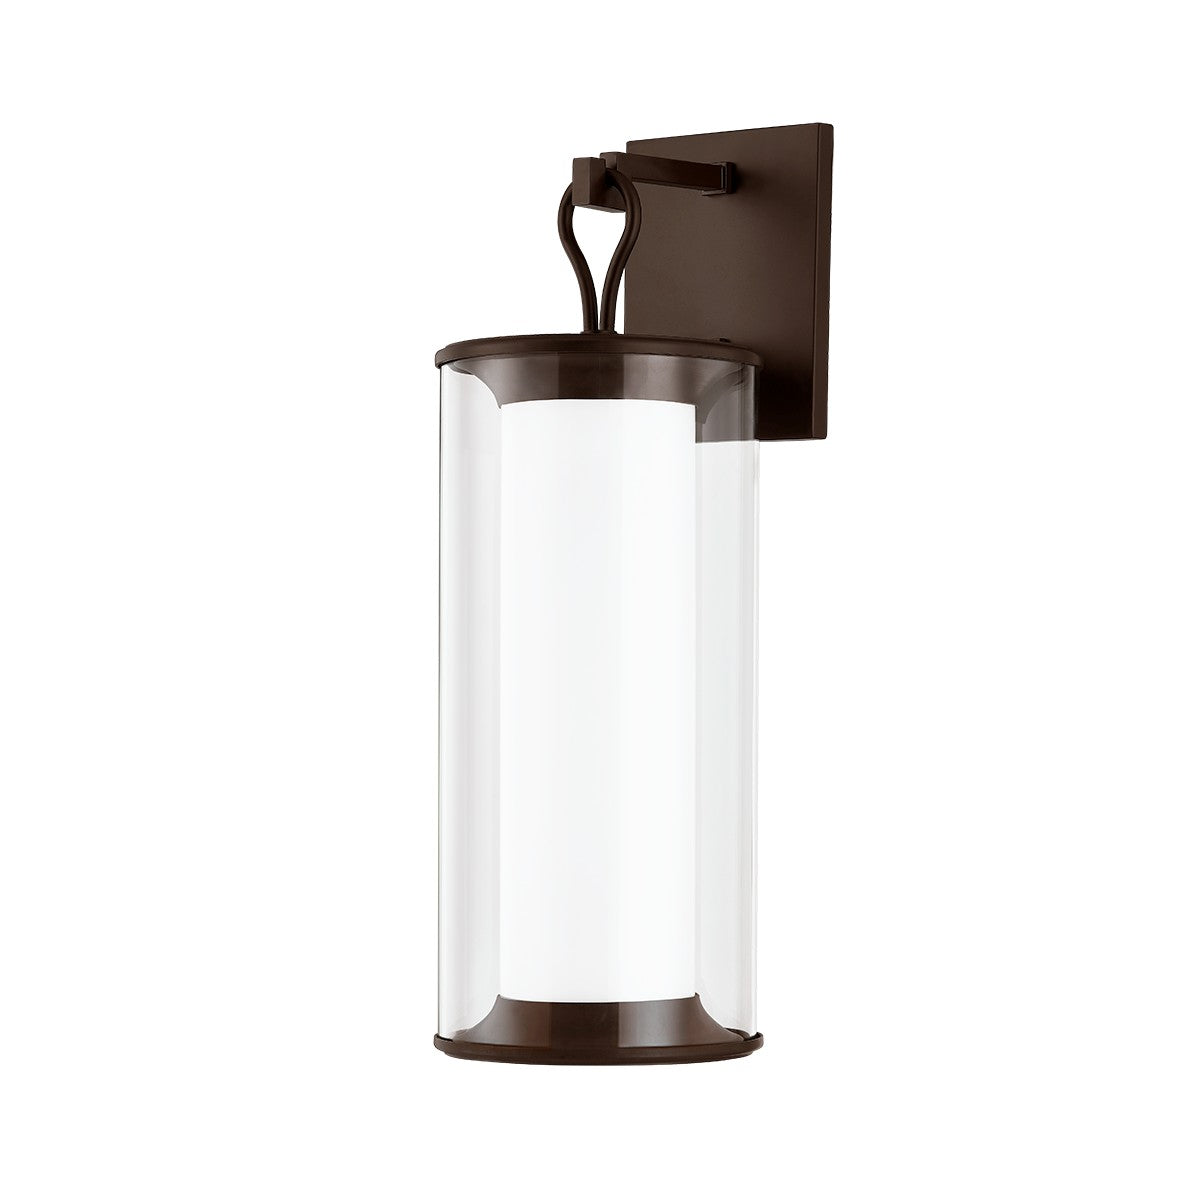 Troy Lighting - B3123-BRZ - One Light Exterior Wall Sconce - Cannes - Bronze